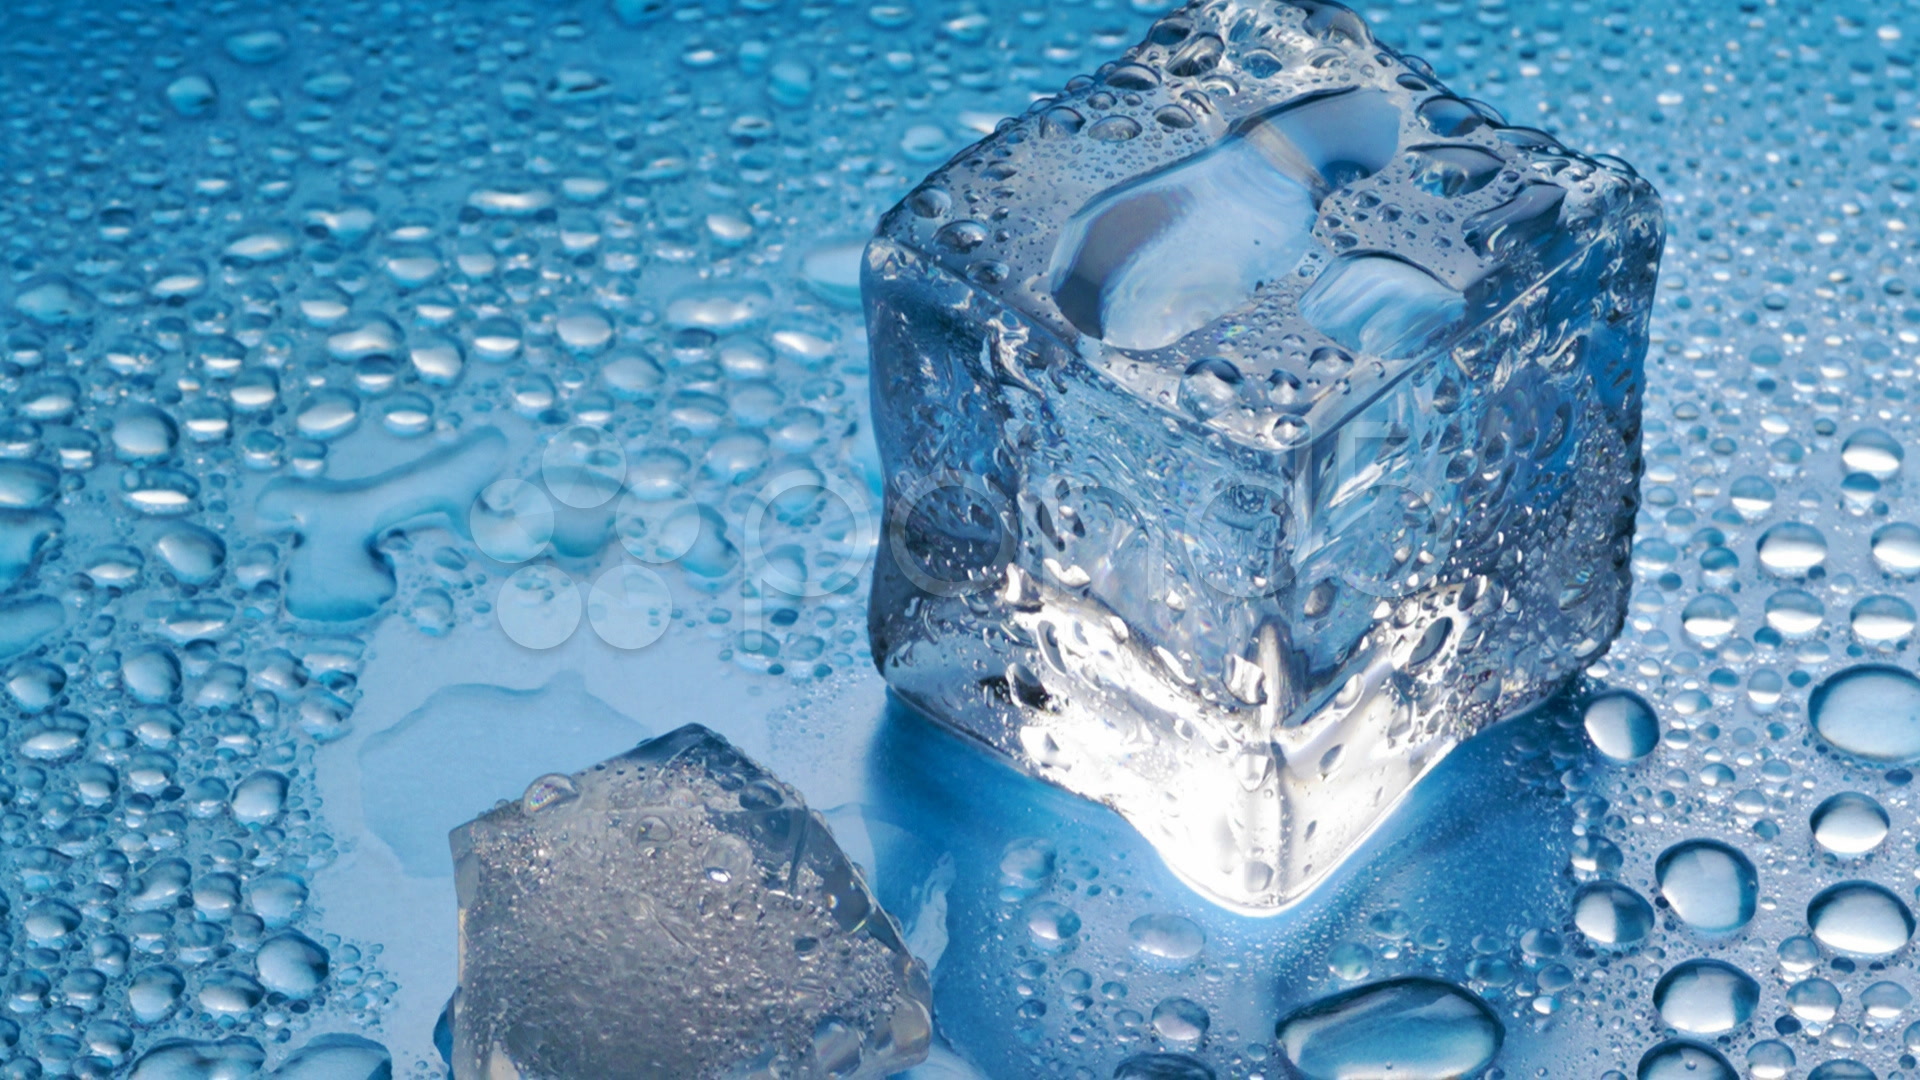 Melting Ice Cube Wallpaper Crazy